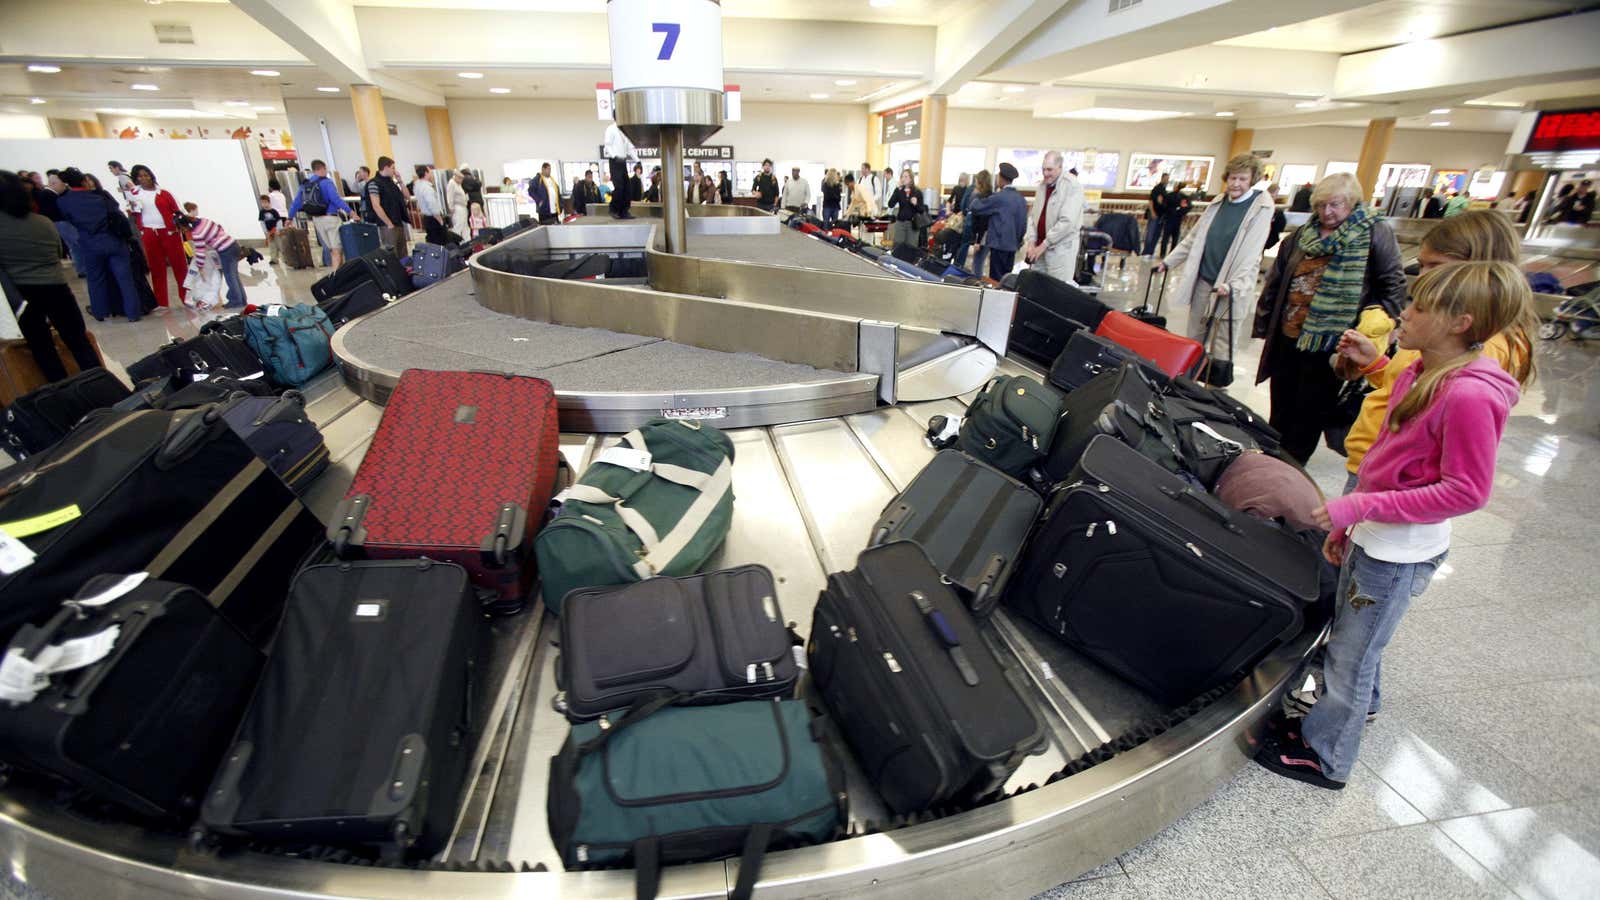 2006: The days of fee-free checked bags